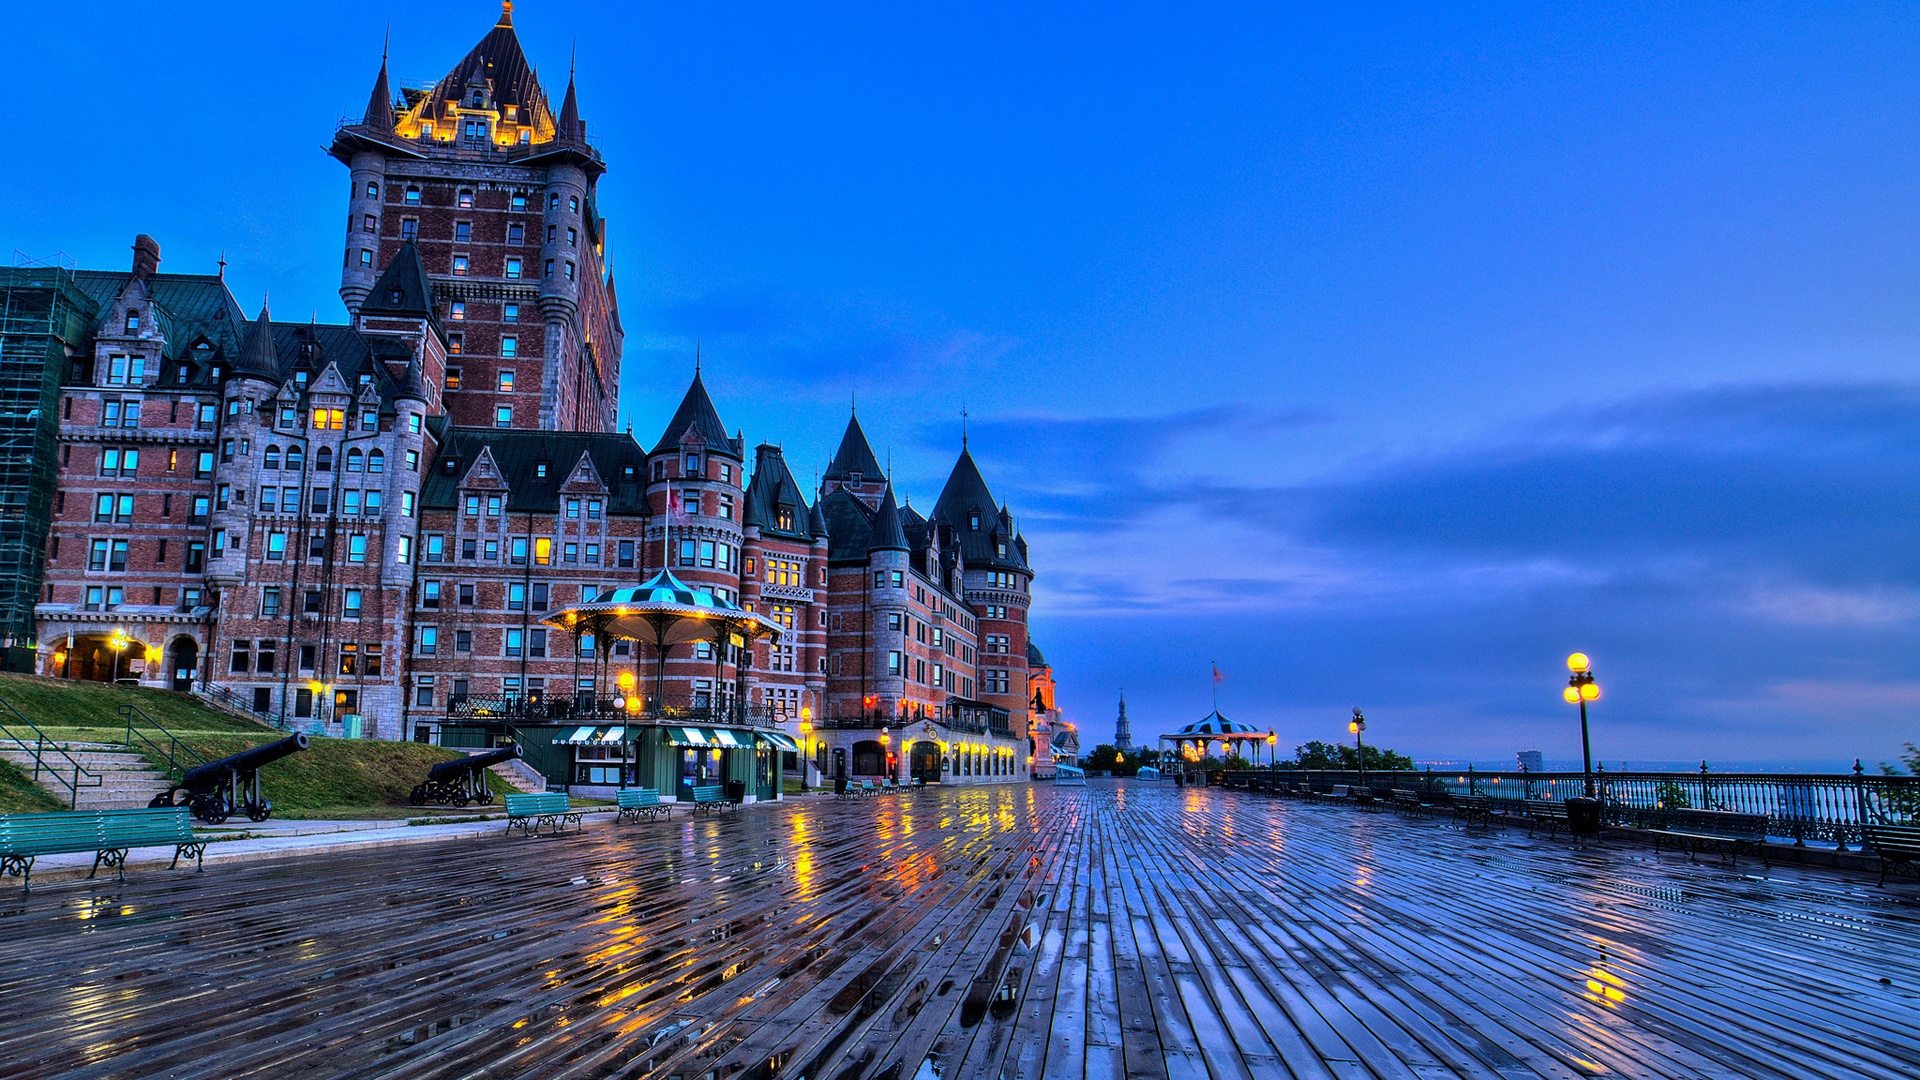 Quebec City Canada Chateau Frontenac castle benches evening Wallpaper